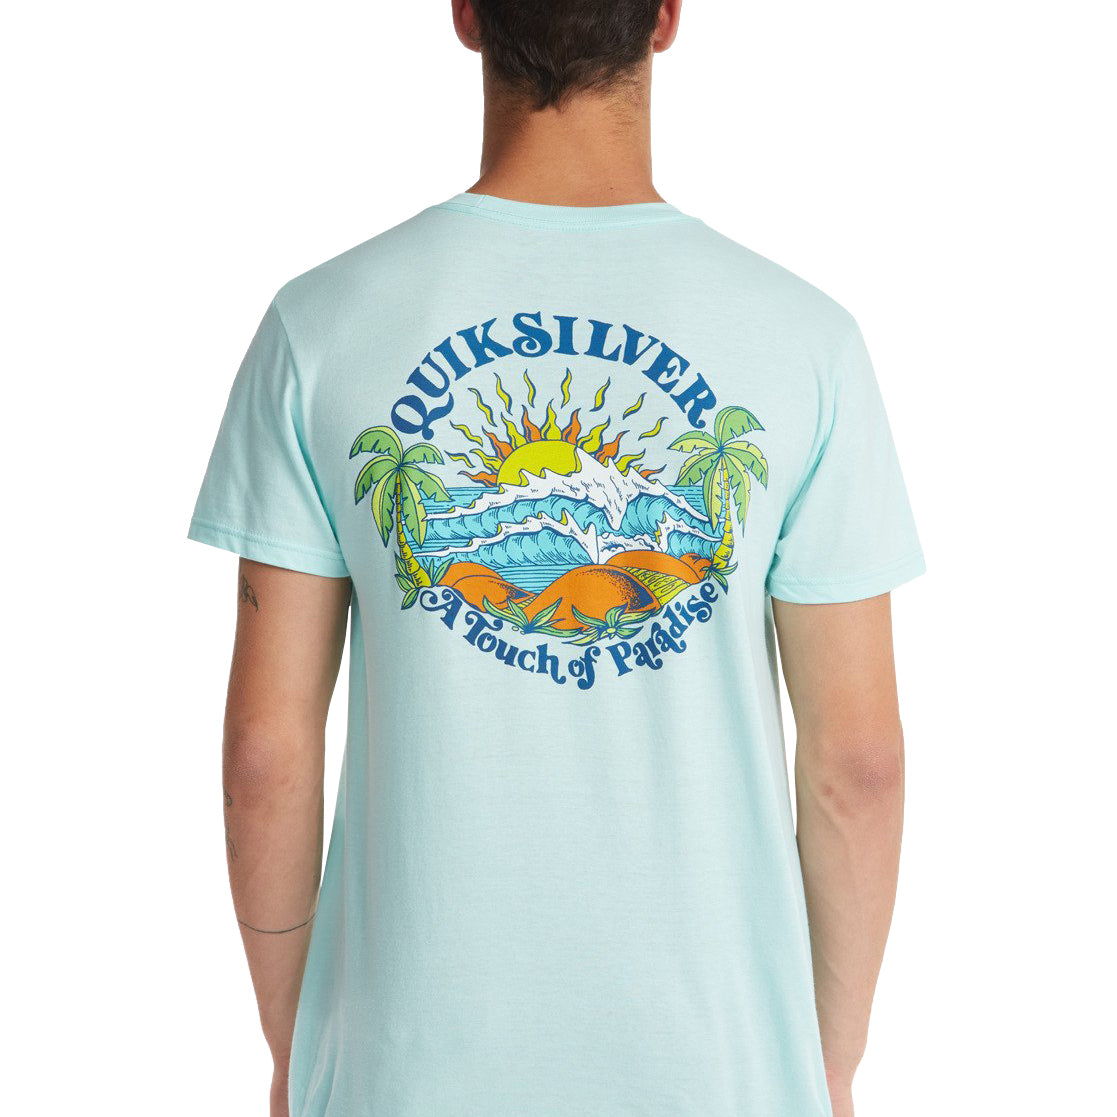 Quiksilver Many Nows SS Tee BET0 S